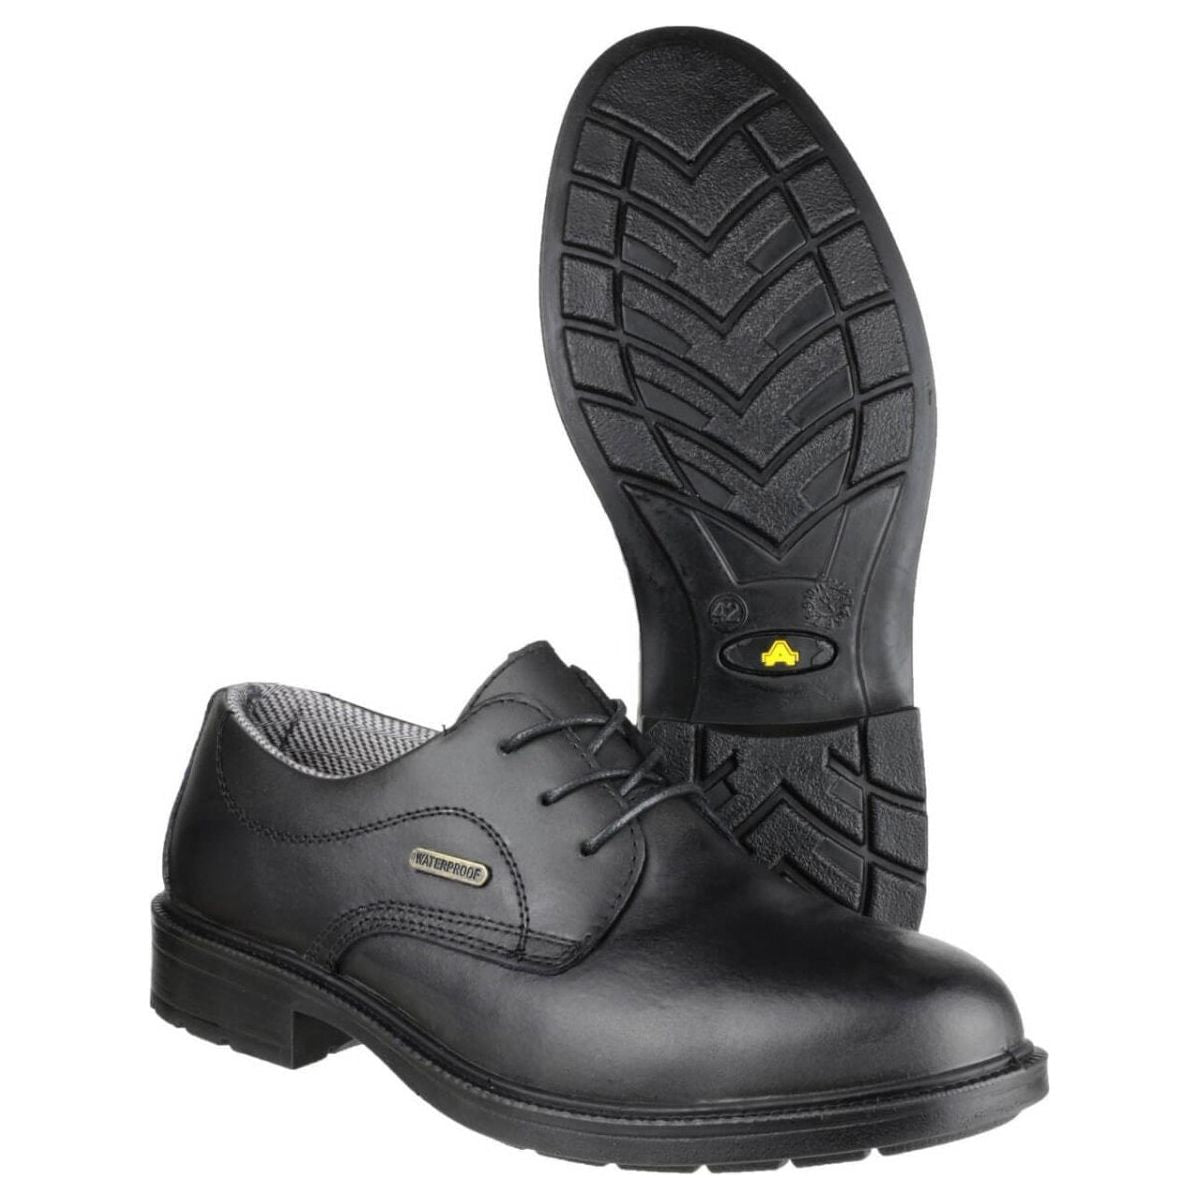 Amblers Fs62 Waterproof Gibson Safety Shoes Mens - workweargurus.com